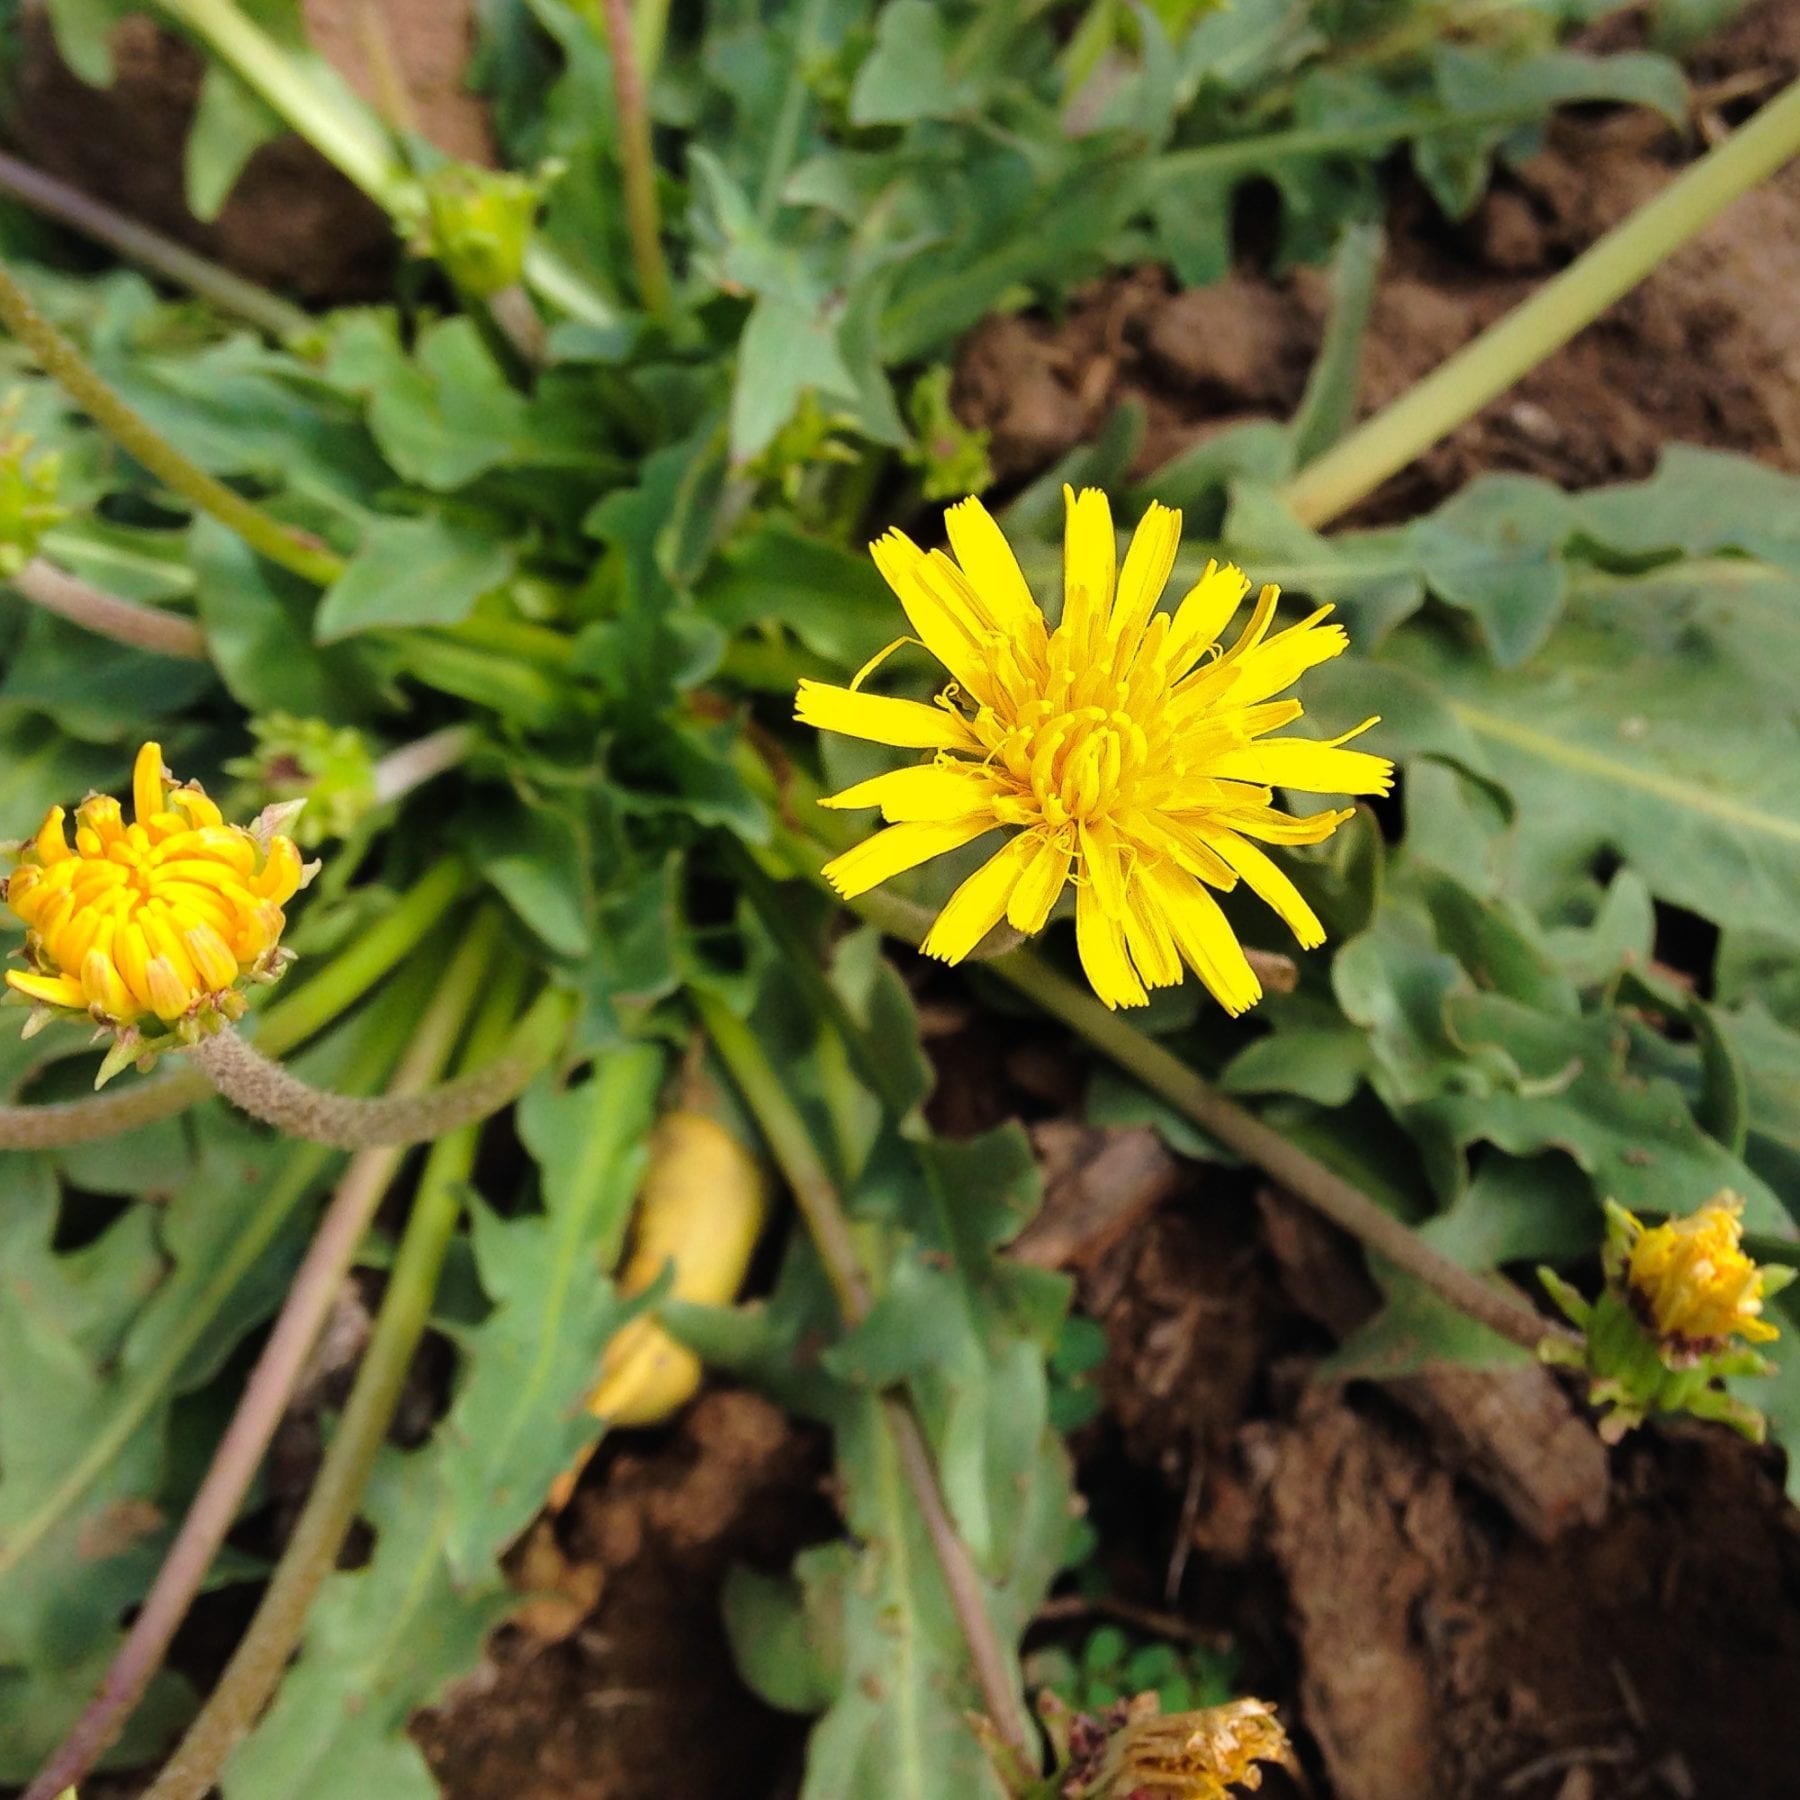 Dandelions could be a sustainable source of rubber